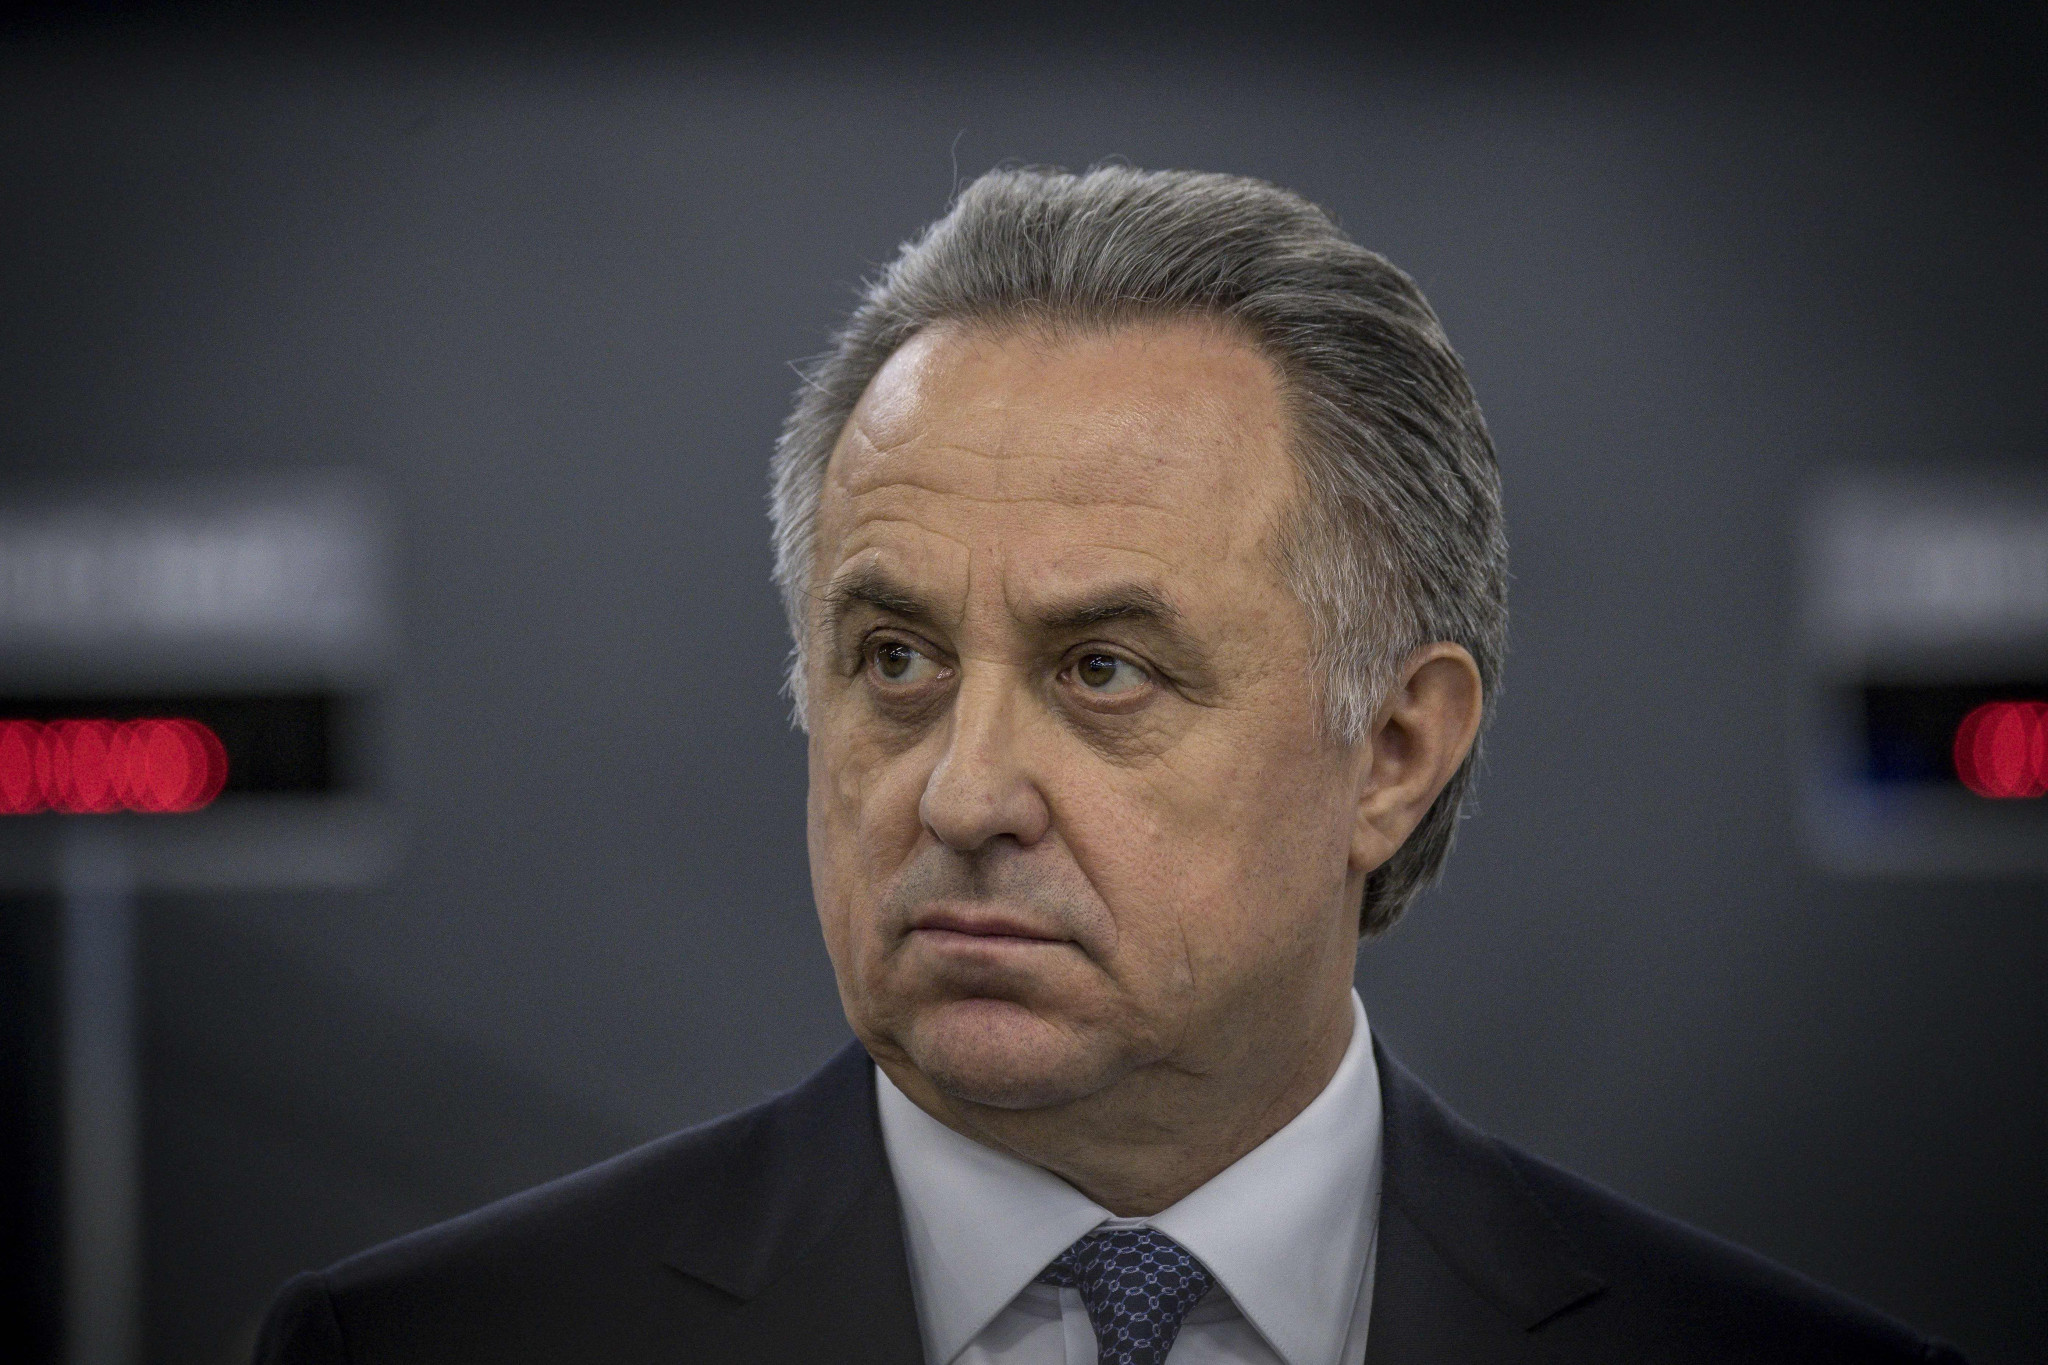 FairSport slams CAS decision to uphold Mutko appeal against lifetime Olympic ban